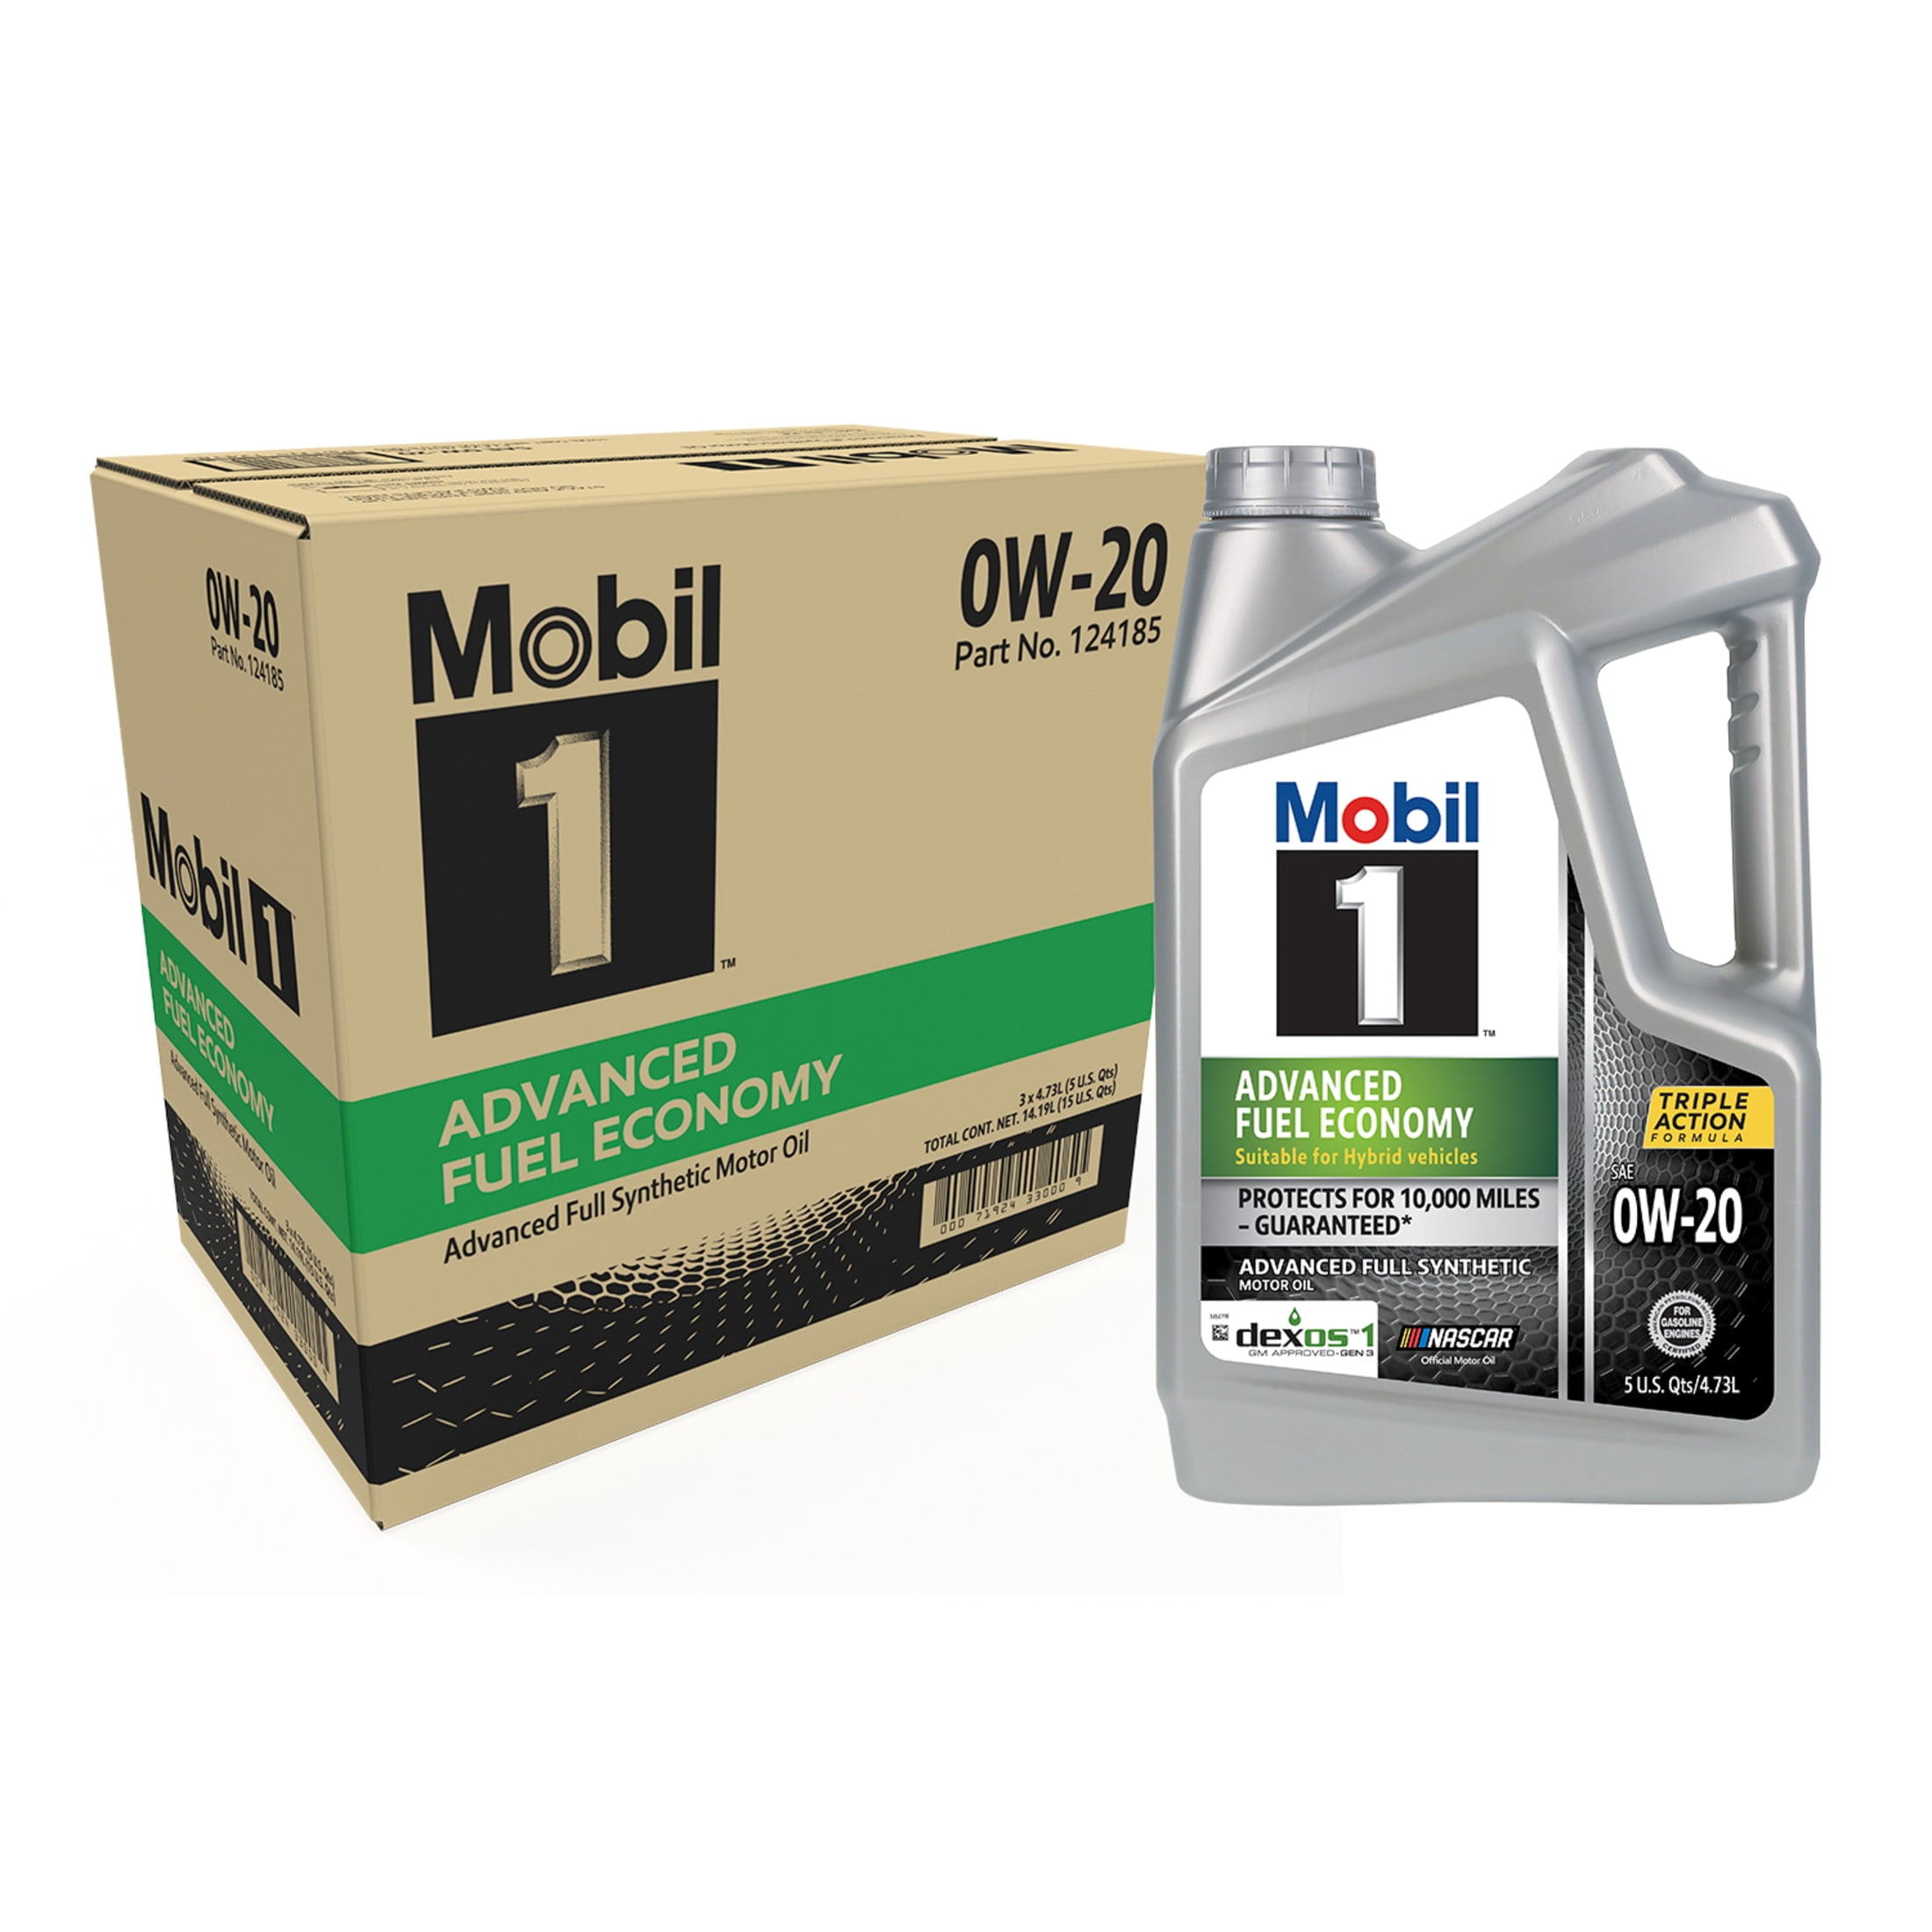 3-Pack 5-Qt. Mobil 1 Advanced Fuel Economy Full Synthetic Motor Oil 0W-20 $63.88 & More + Free Shipping